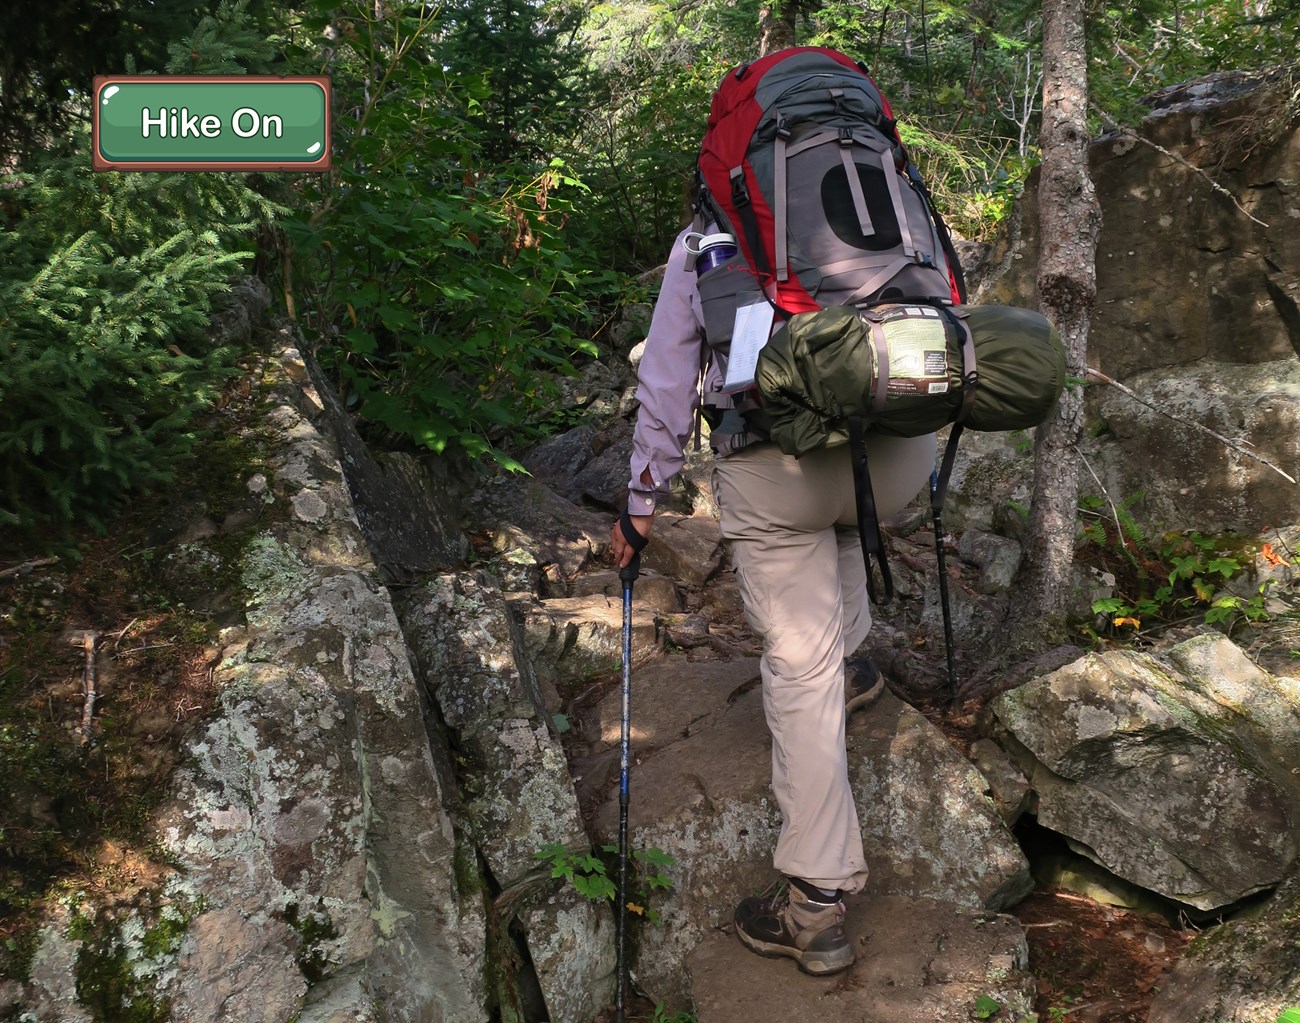 A person wearing a large backpack hikes over some large boulders.